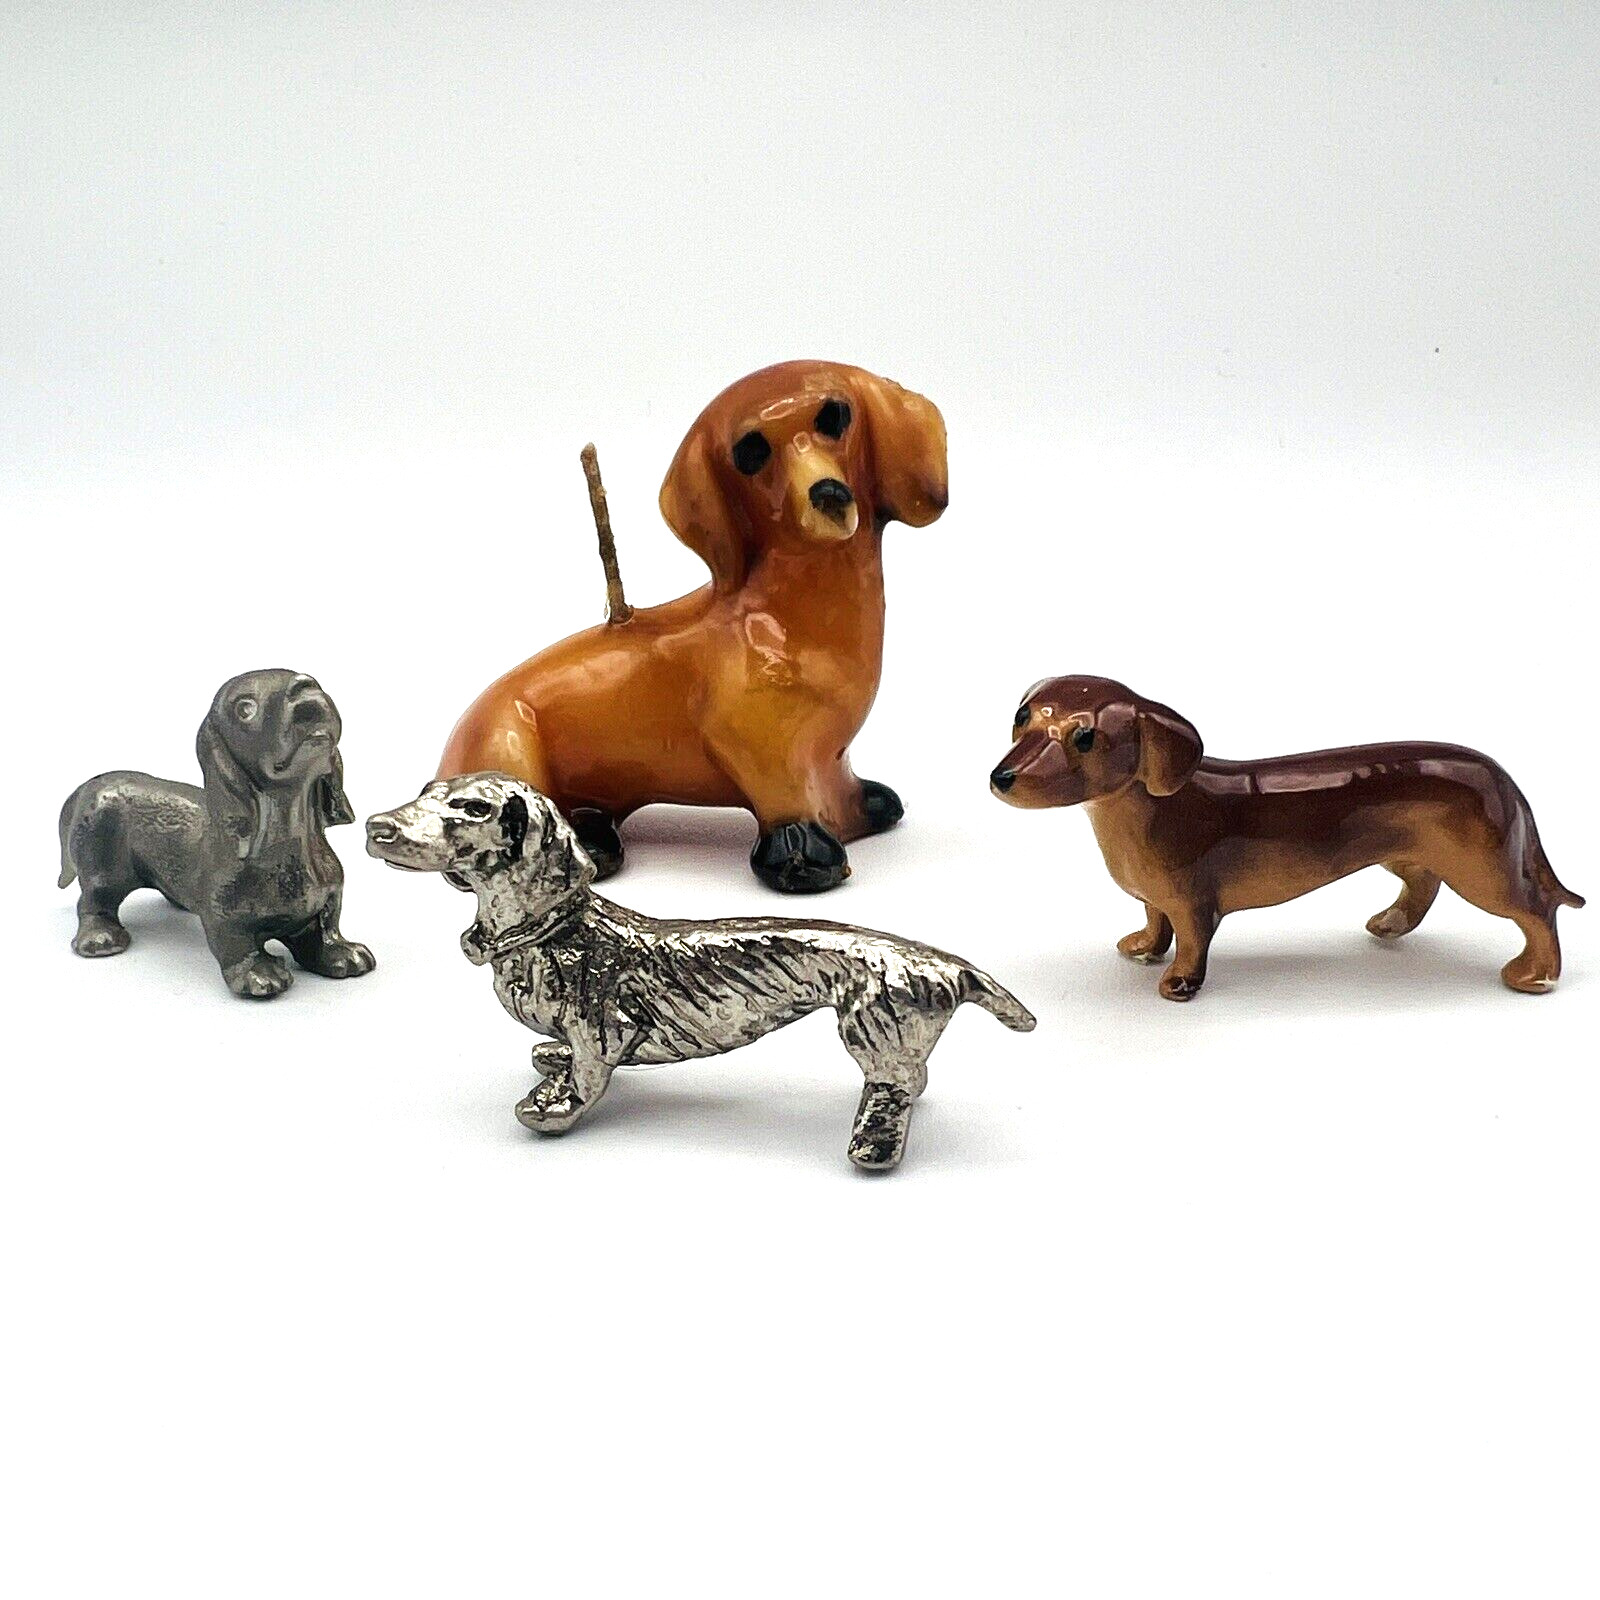 Vintage Miniature Daschund Dog Figurine Lot of 4 Pewter Ceramic and Candle